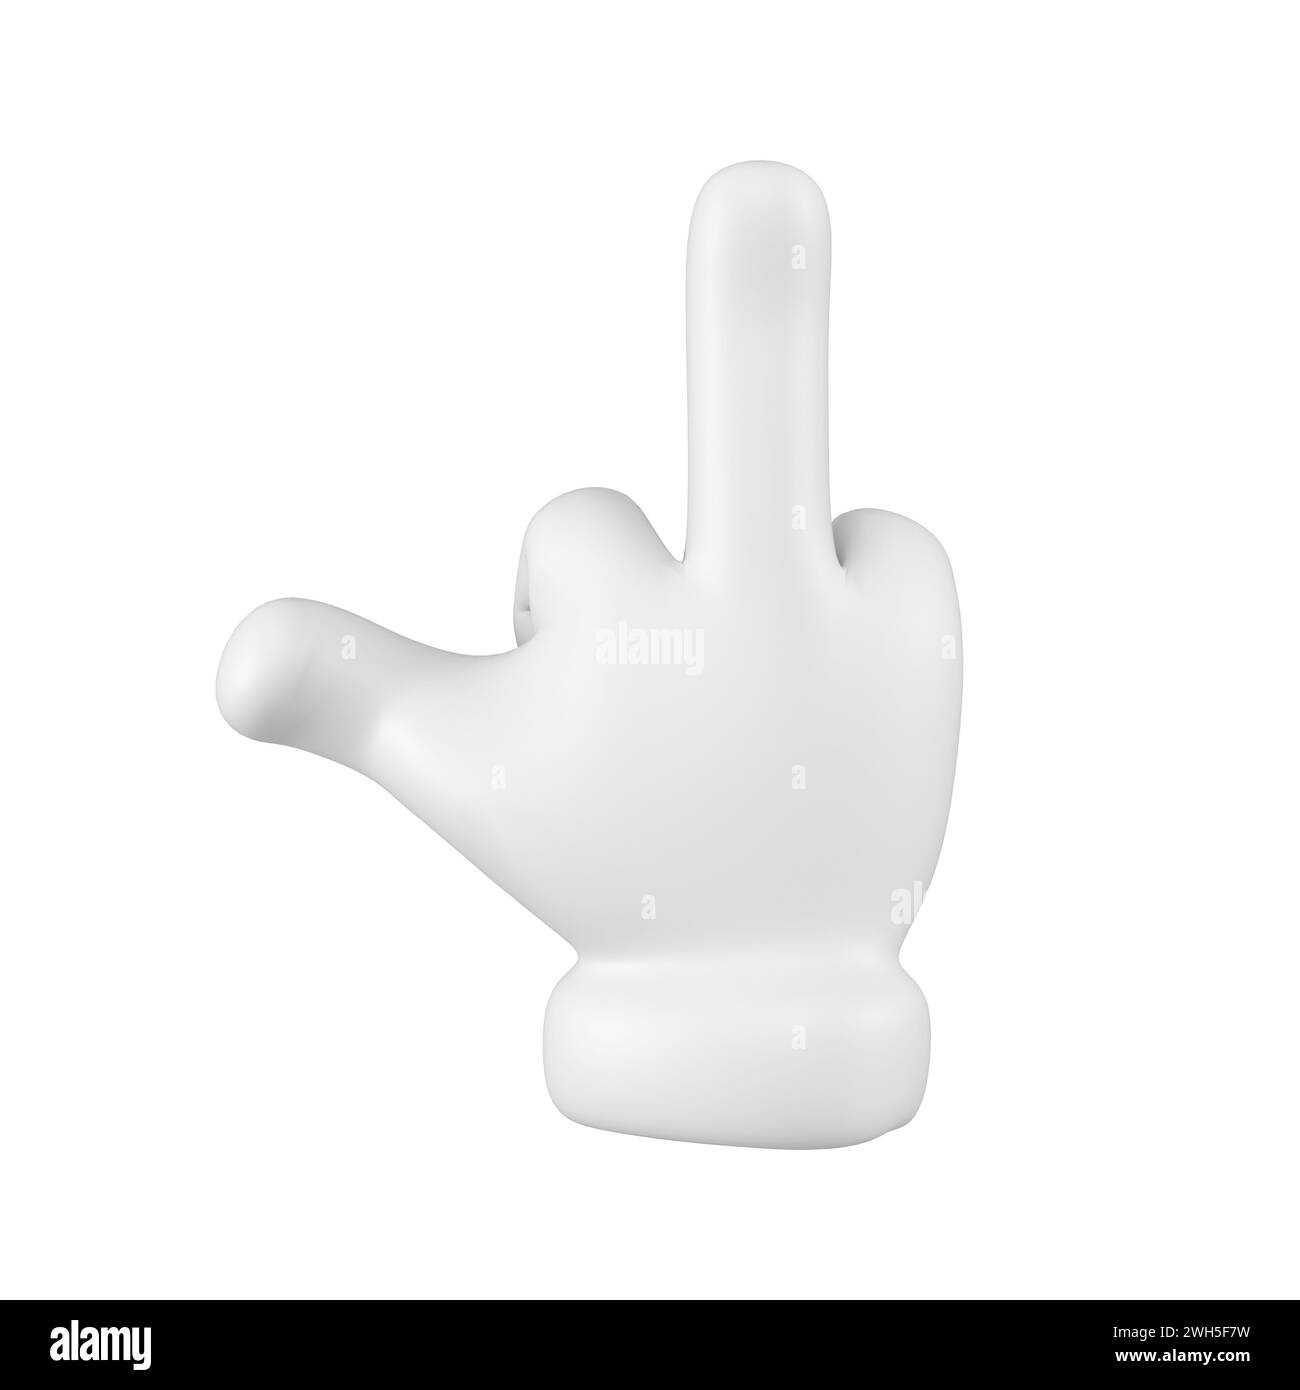 White emoji hand with middle finger gesture isolated. Showing protest symbol, icon and sign concept. 3d rendering. Stock Photo